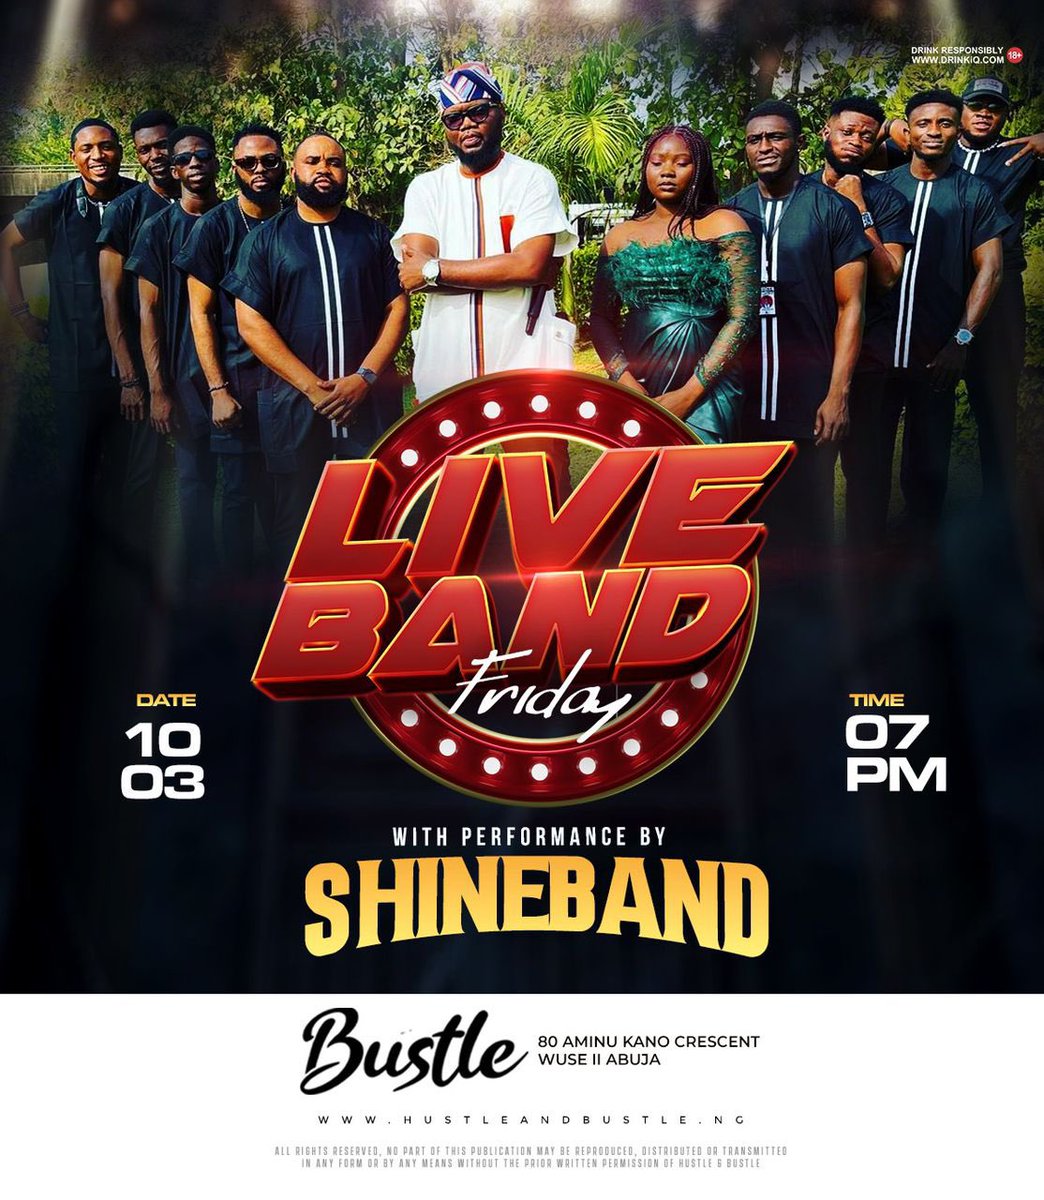 “Feel it in your heart & Feel it in your soul Let the Music take control as we party all Night long” SEE YOU TONIGHT #BustleFridays #WeekendStarter #LiveMusic #LiveBand #TGIF #ShineBandMusic2023